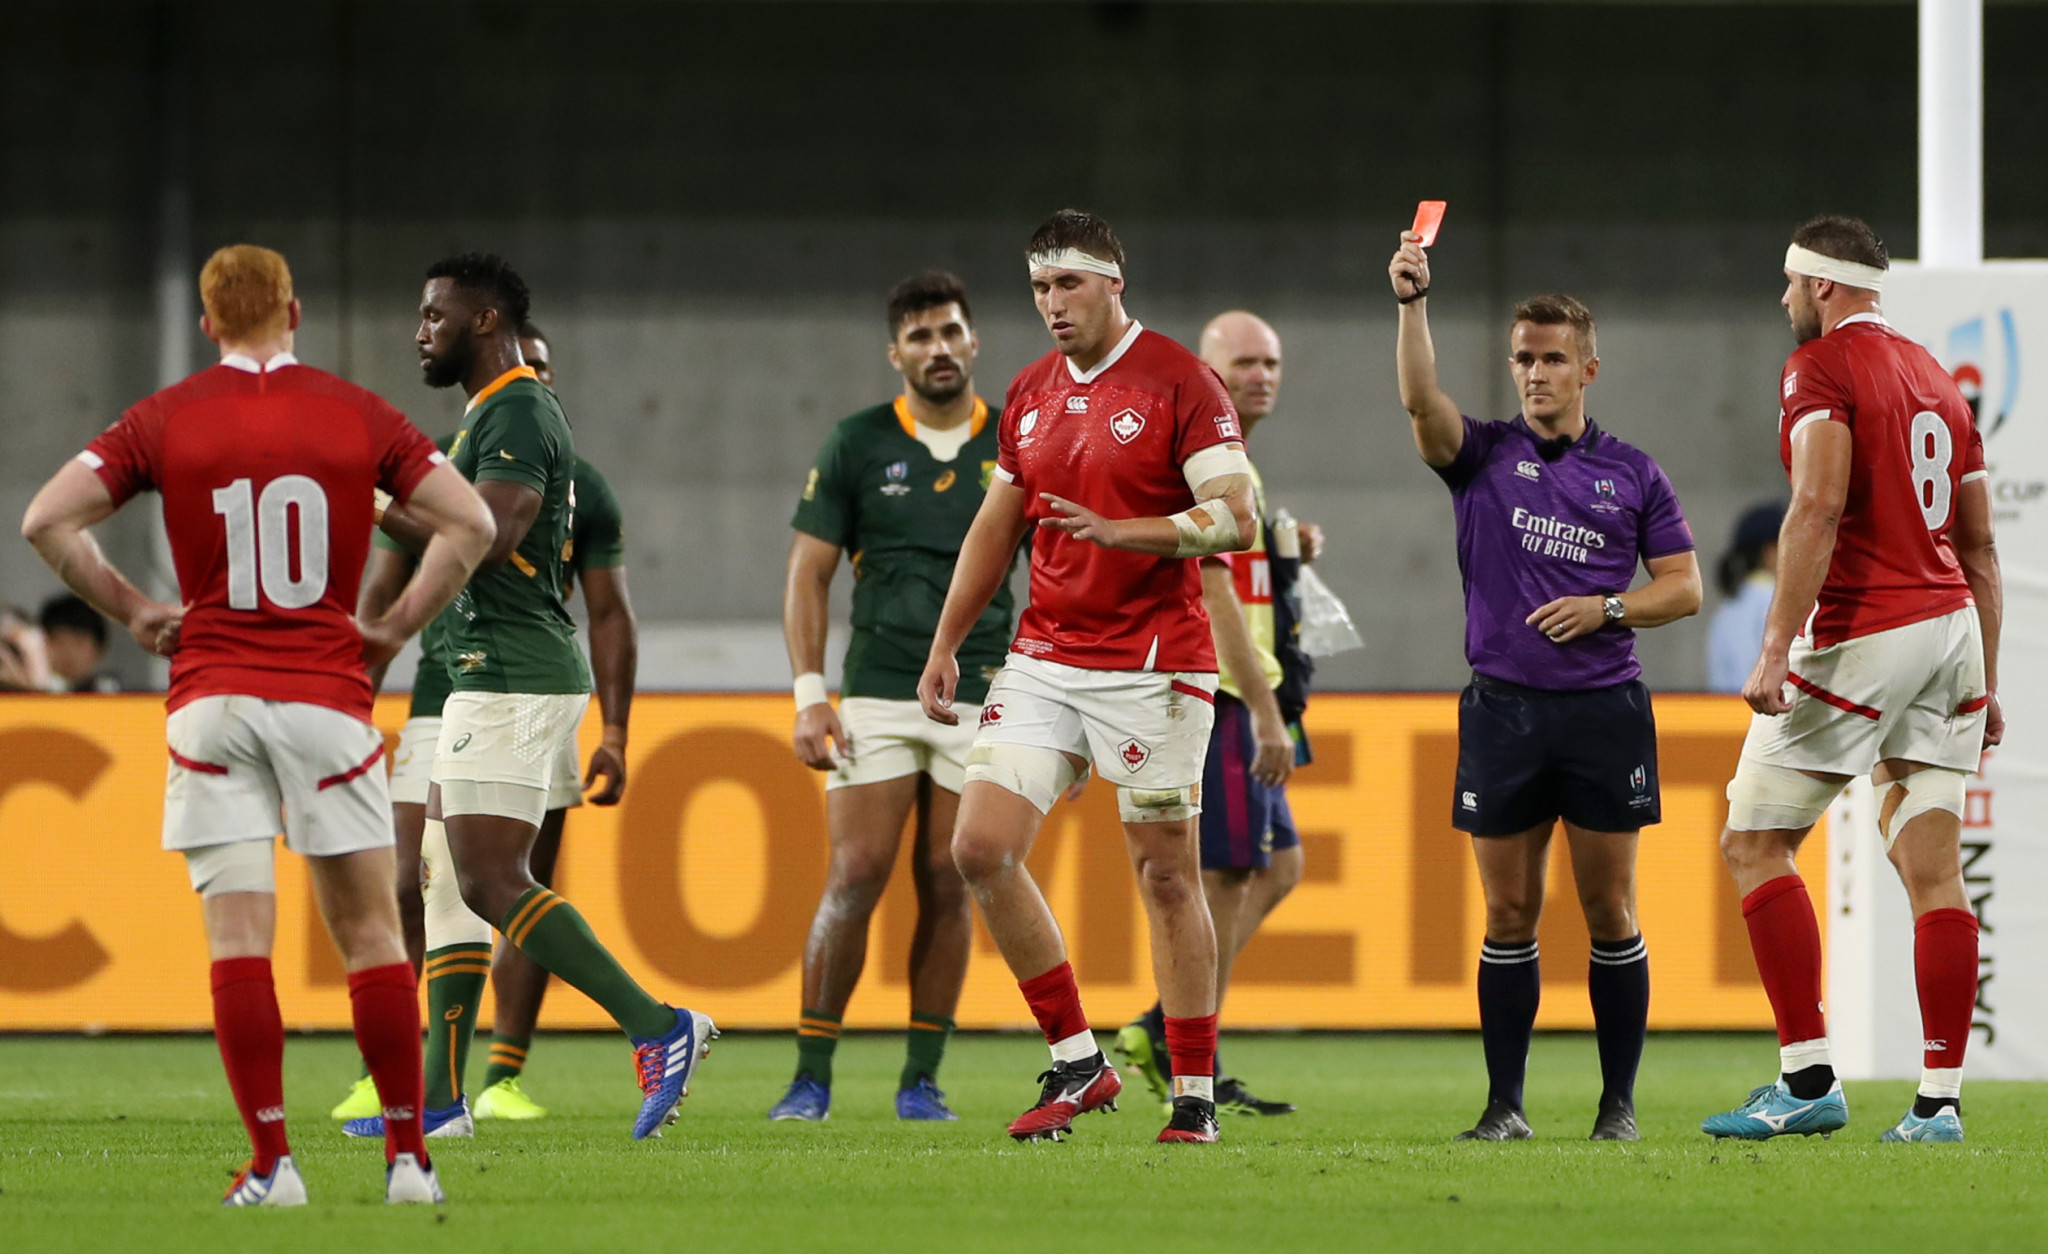 Josh Larsen became the sixth player to be red-carded at the 2019 Rugby World Cup ©Getty Images